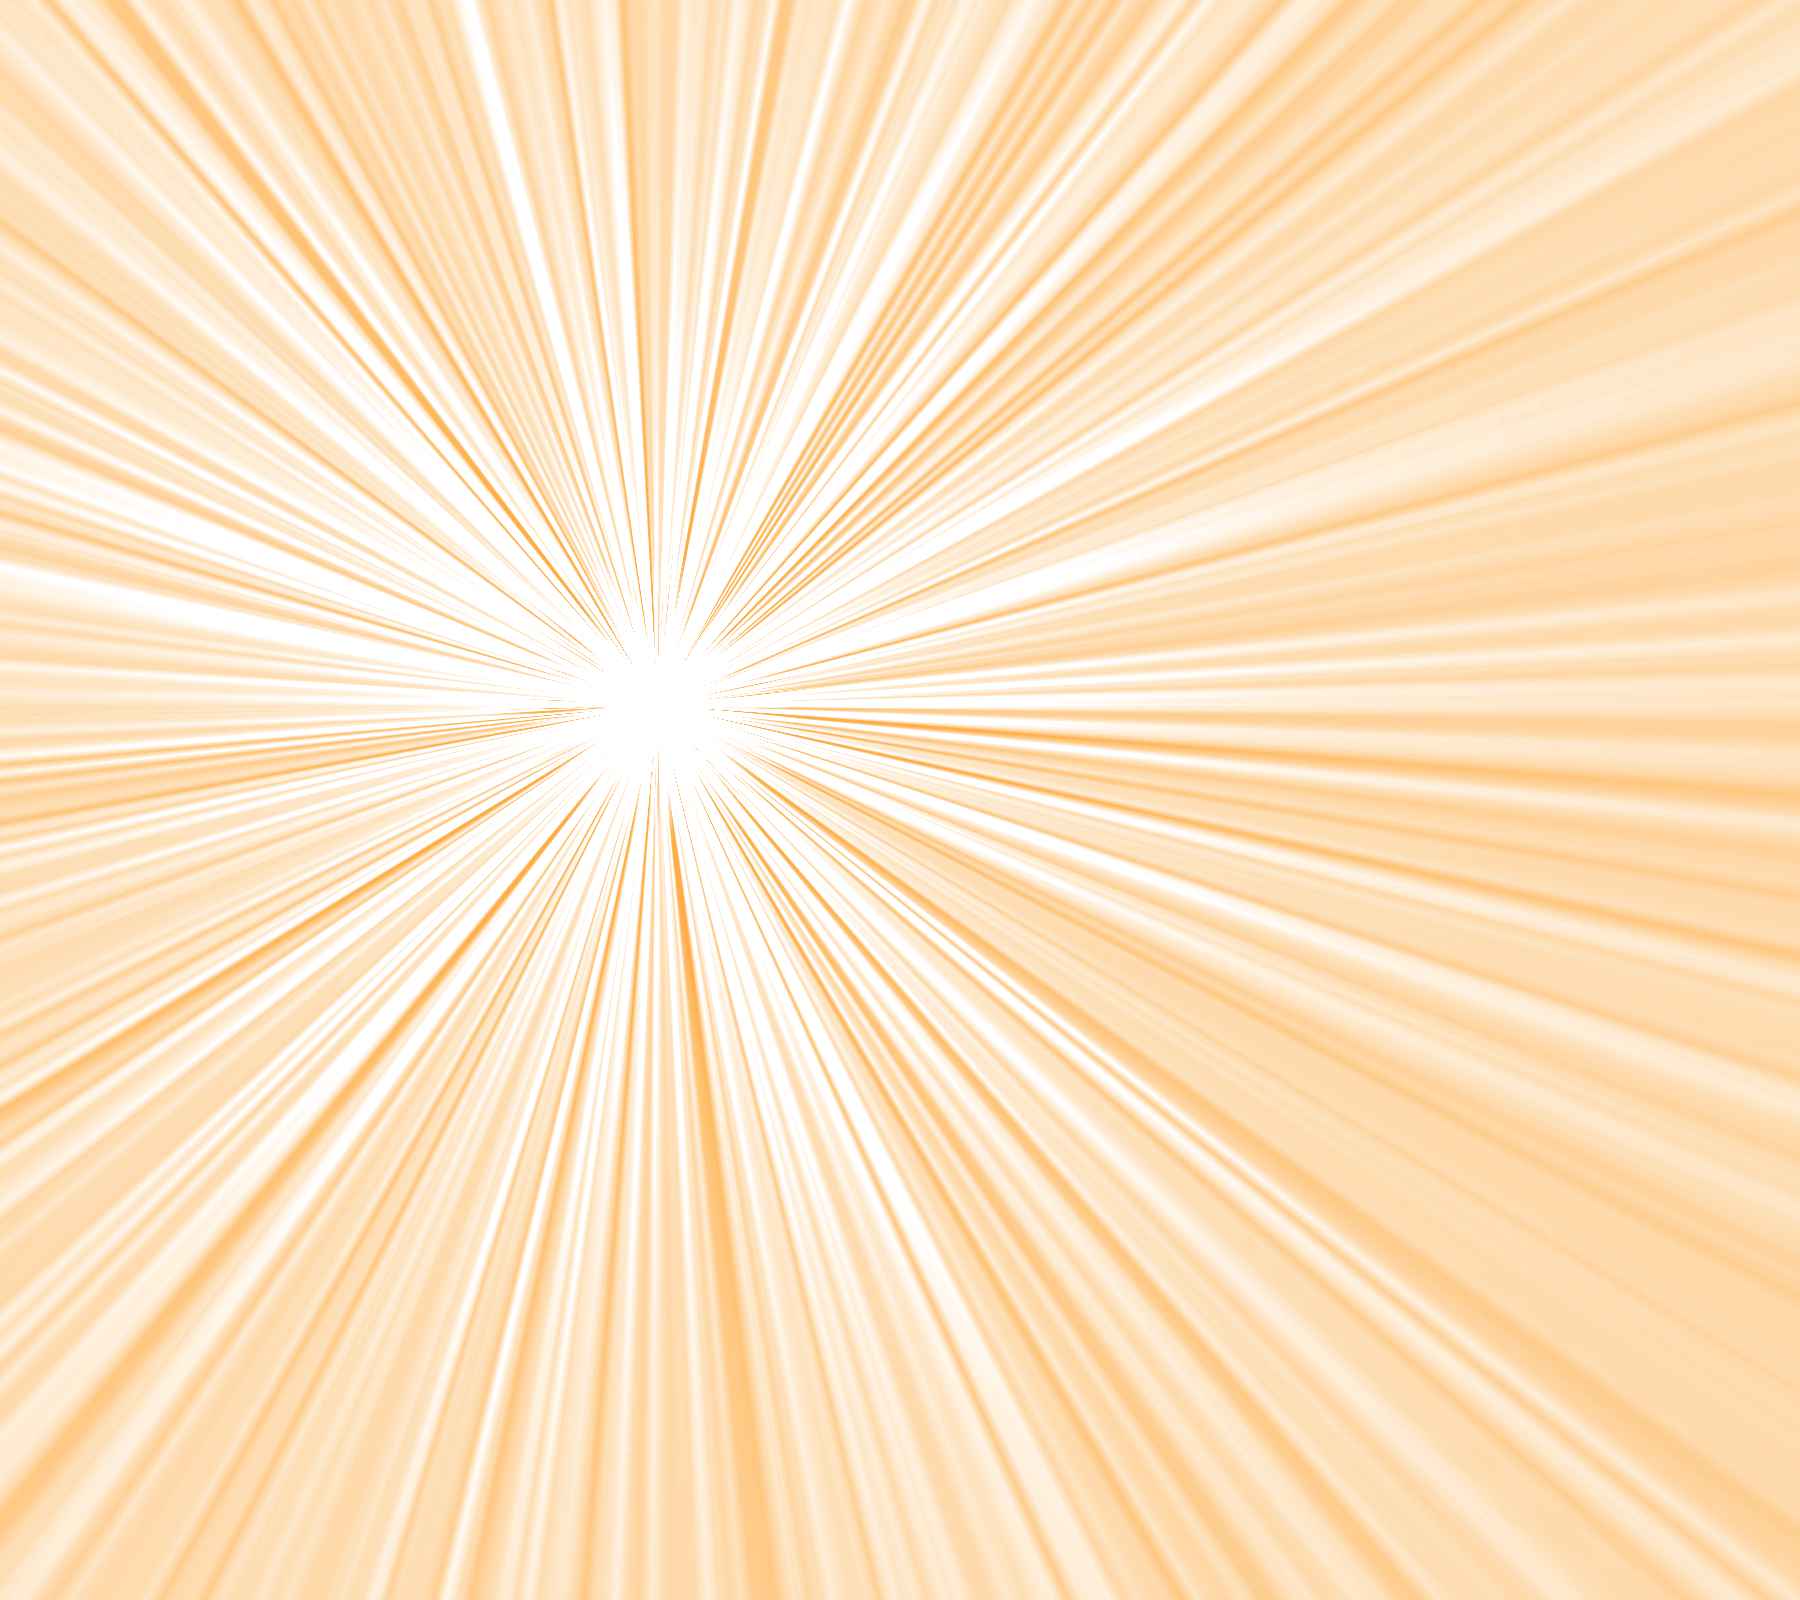 Peach Colored Starburst Radiating Lines Background 1800x1600